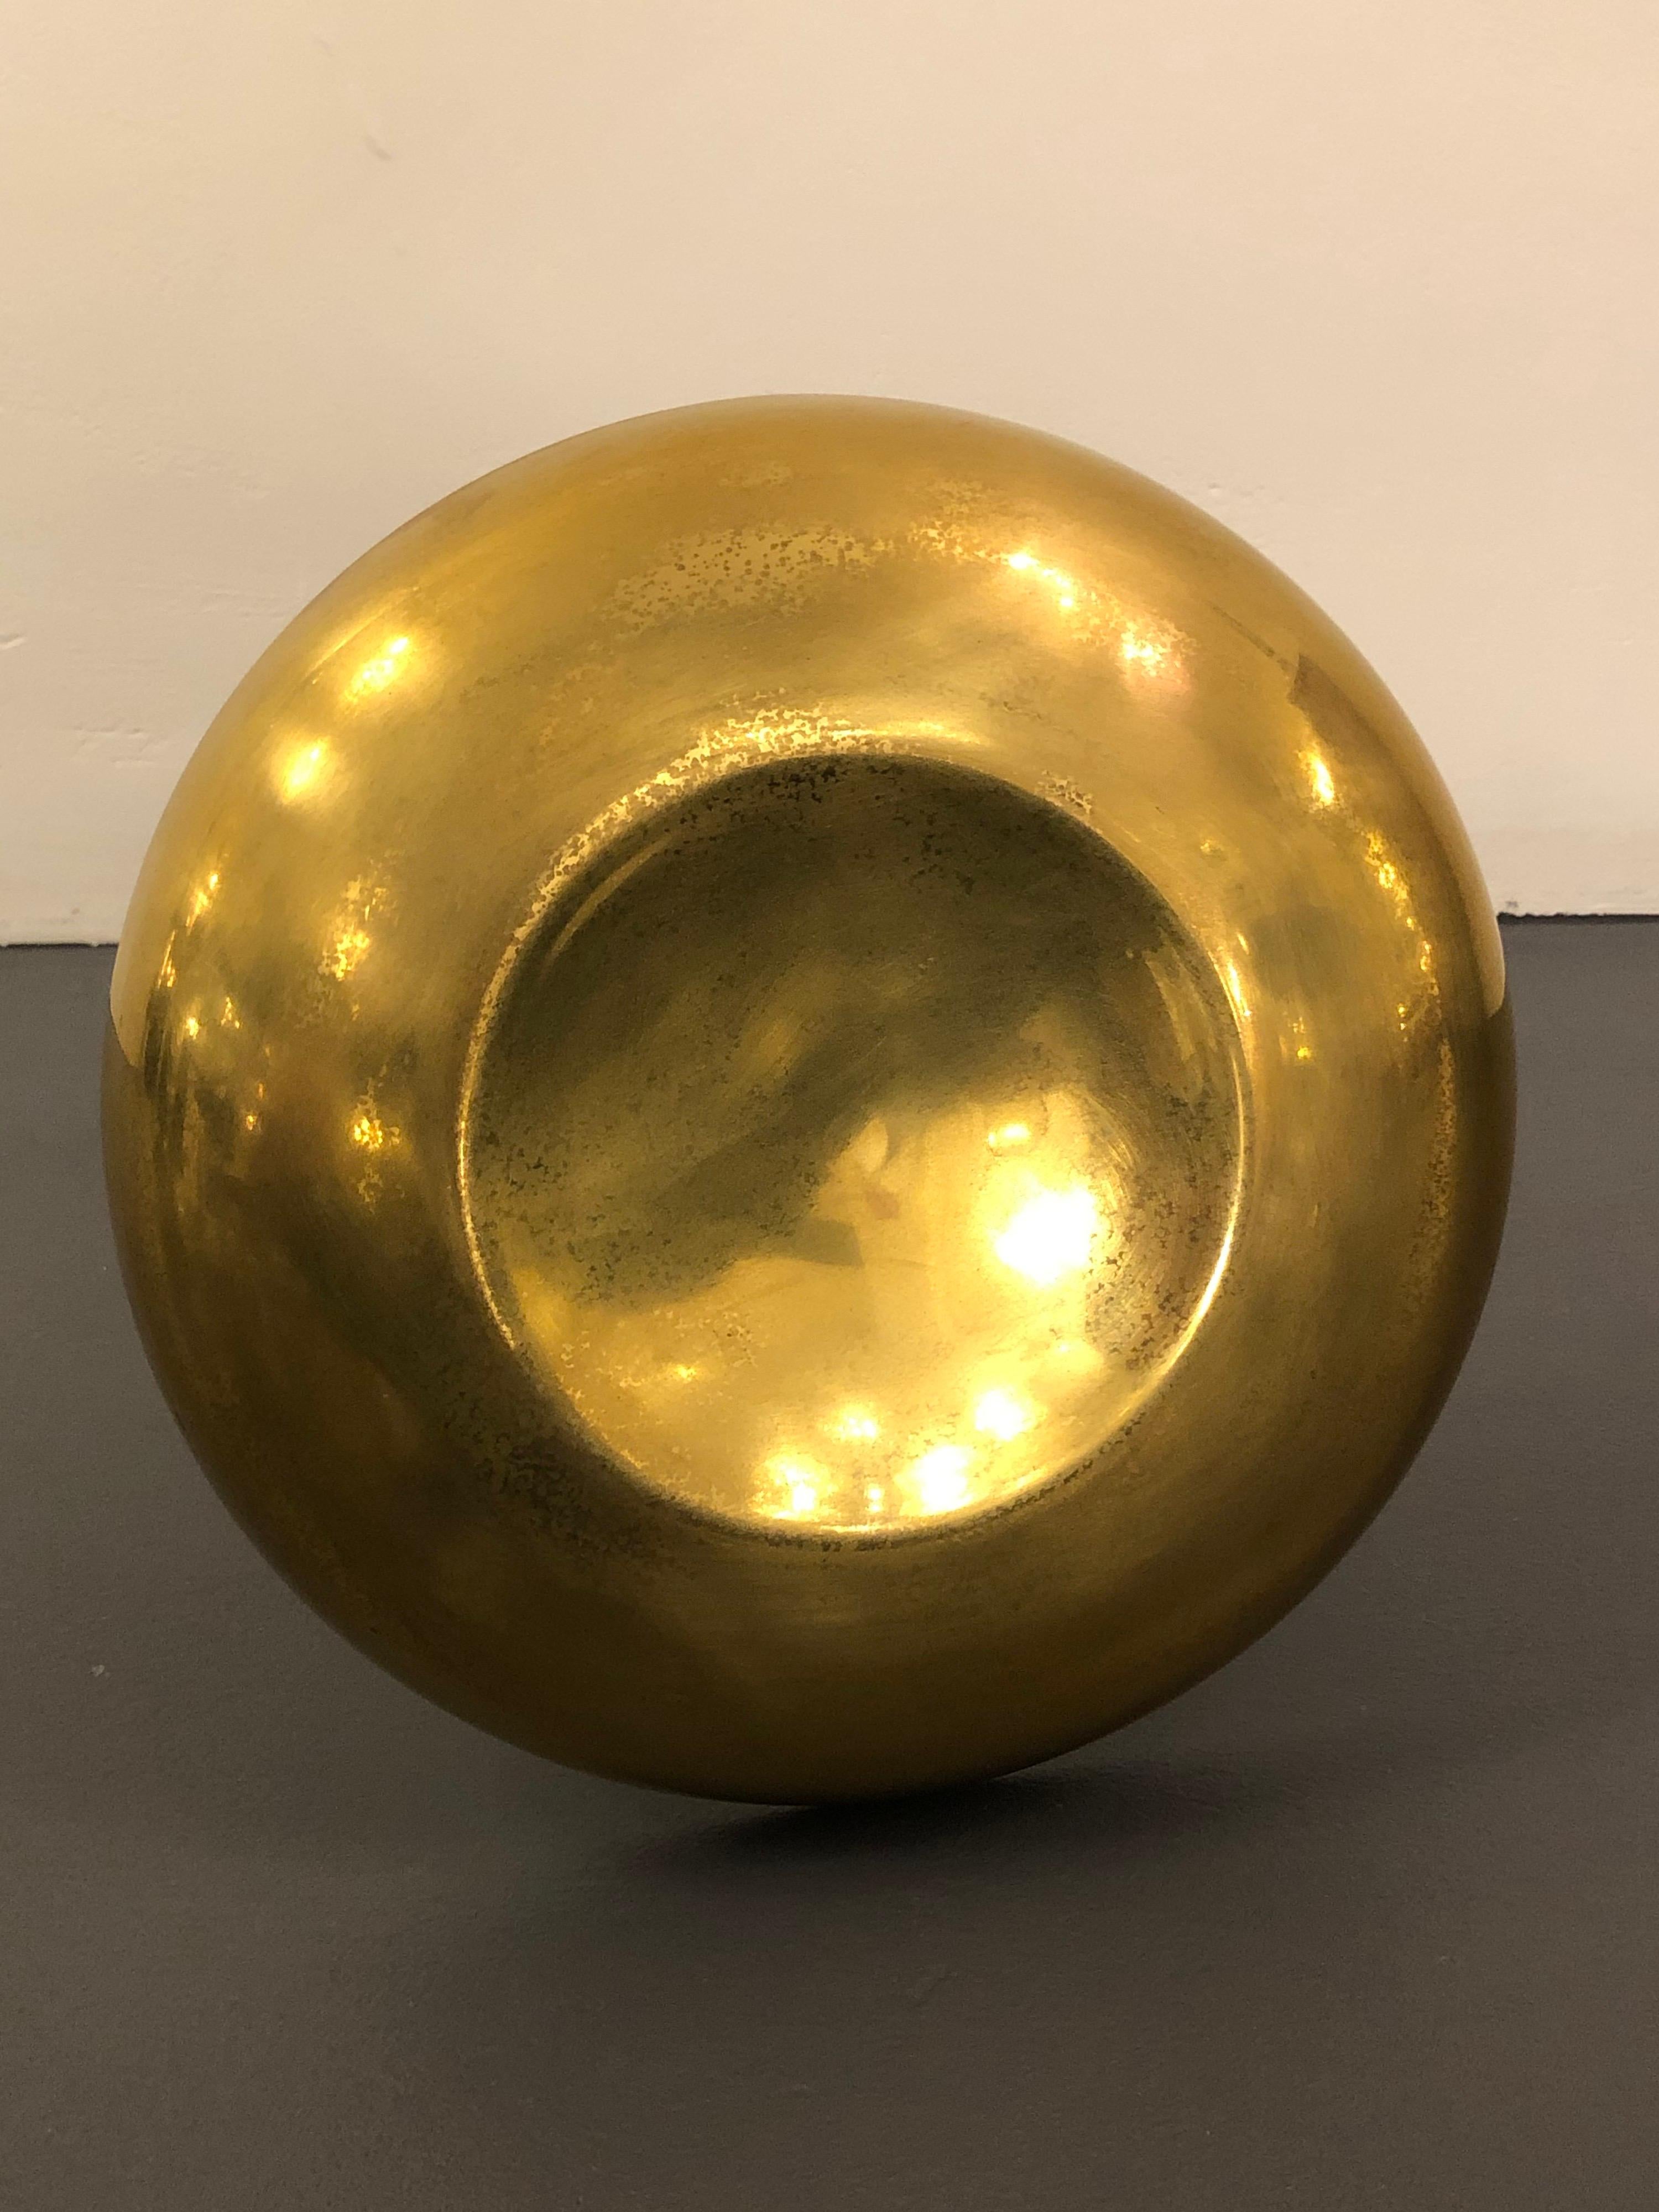 Italian Midcentury Brass and Lacquer Table Lamp by Oscar Torlasco for Lumi, 1950s For Sale